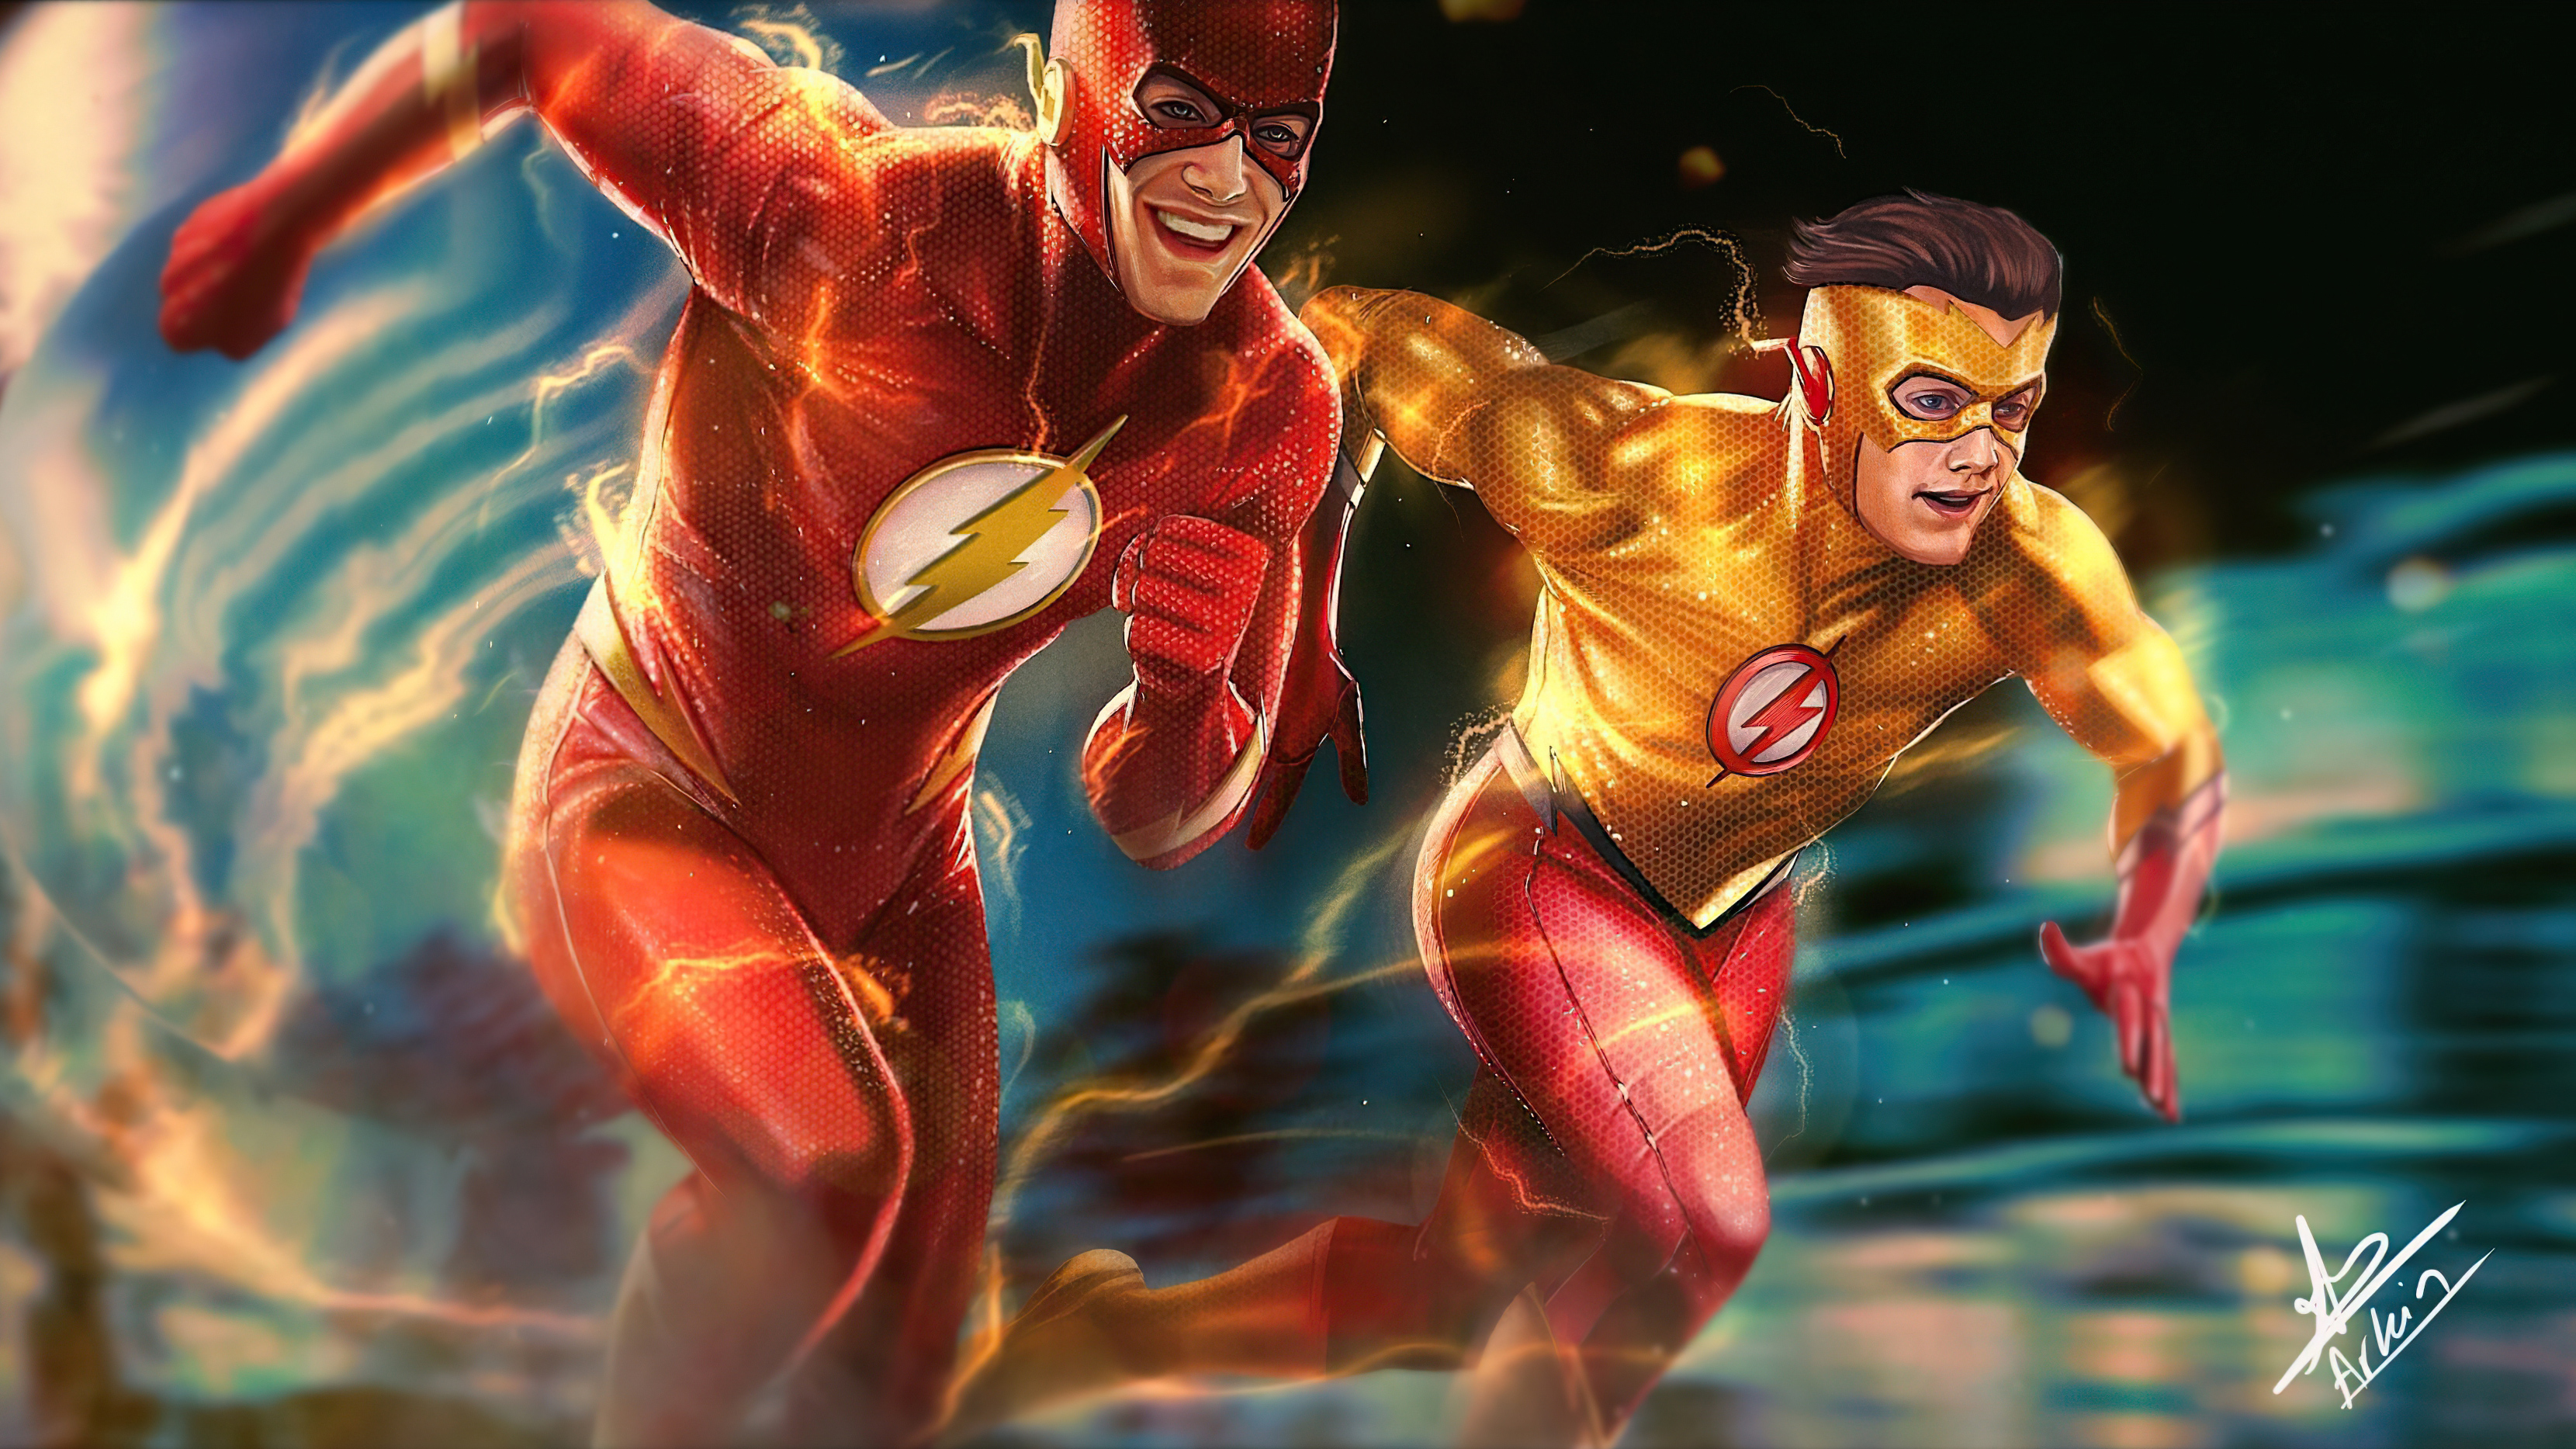 1920x1080 Flash And Kid Flash 4k Laptop Full Hd 1080p Hd 4k Wallpapers Images Backgrounds Photos And Pictures